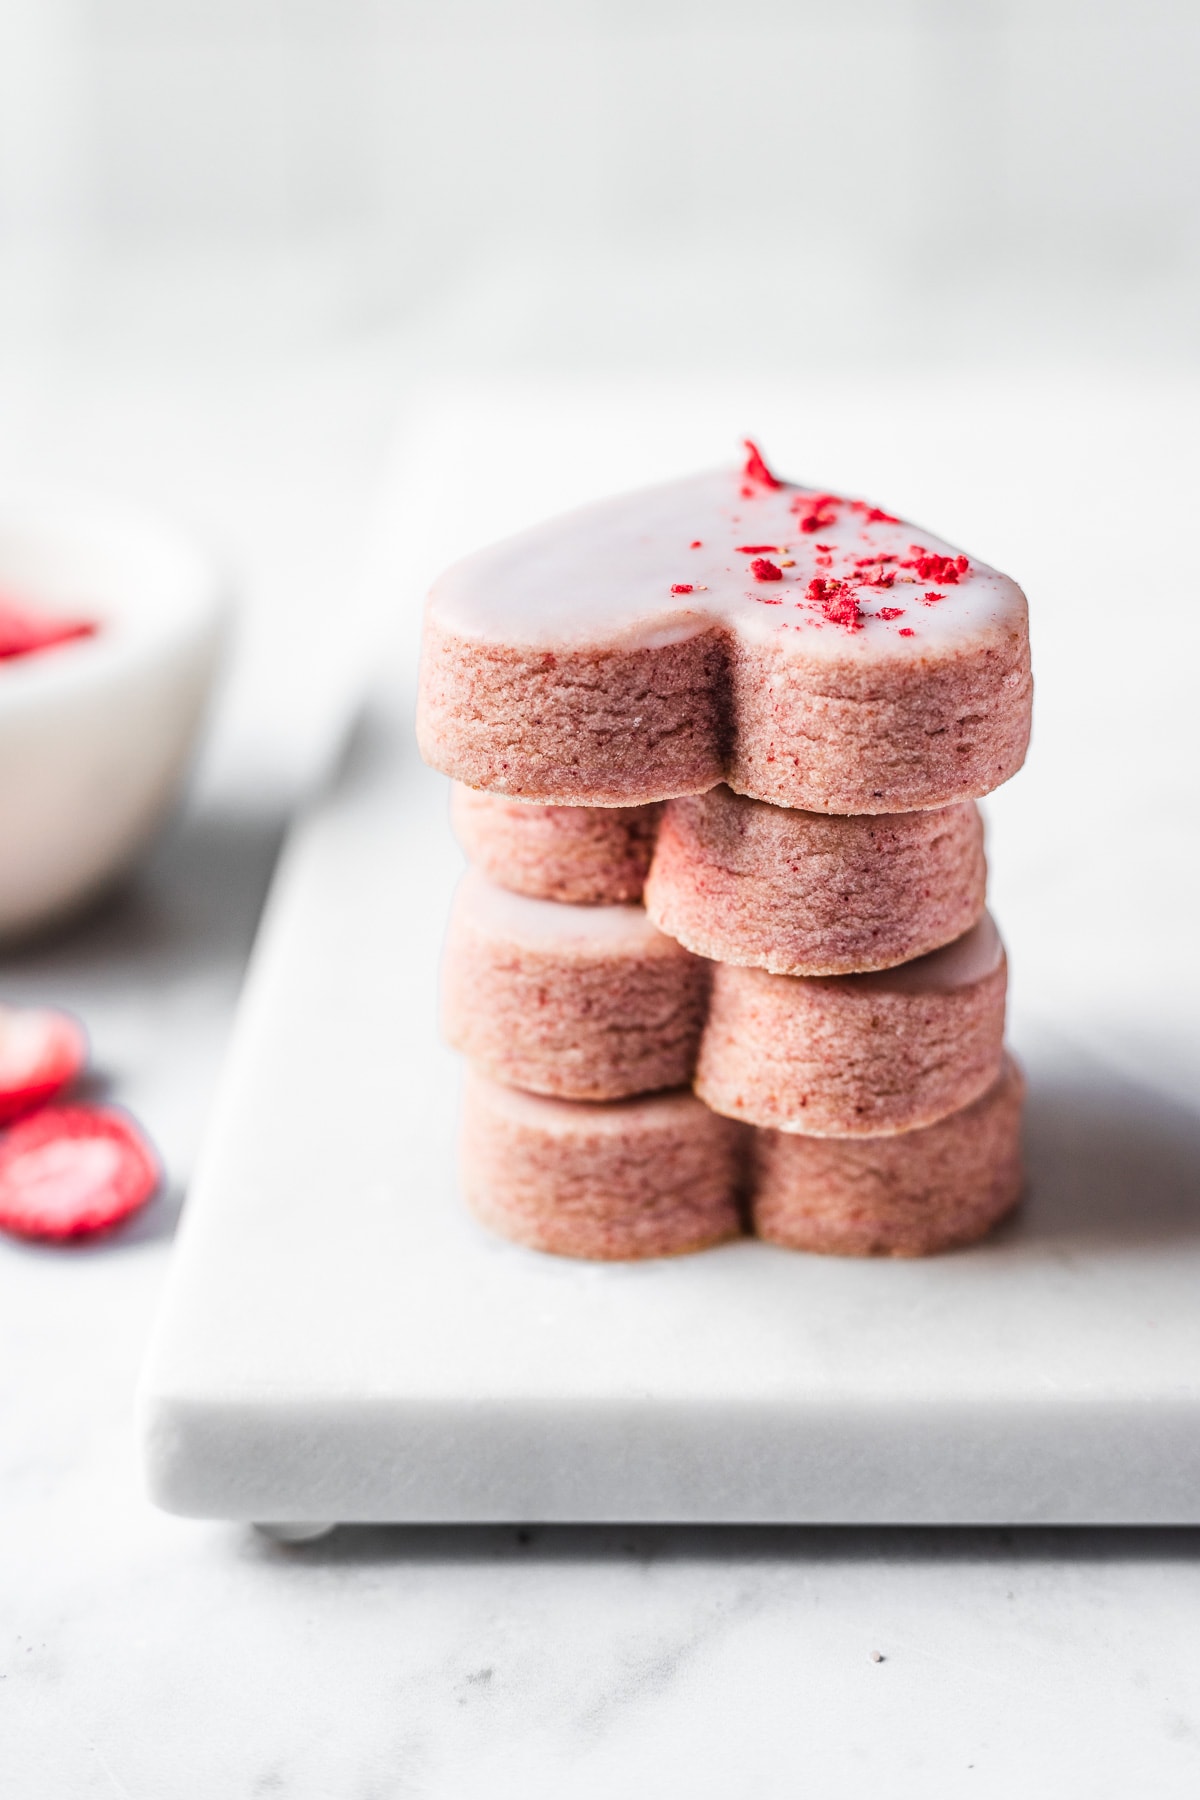 A side view of a stack of four glazed pink heart shaped cookies on a marble tray. The image is light and bright. A white bowl of freeze dried strawberries peeks into the frame at left.